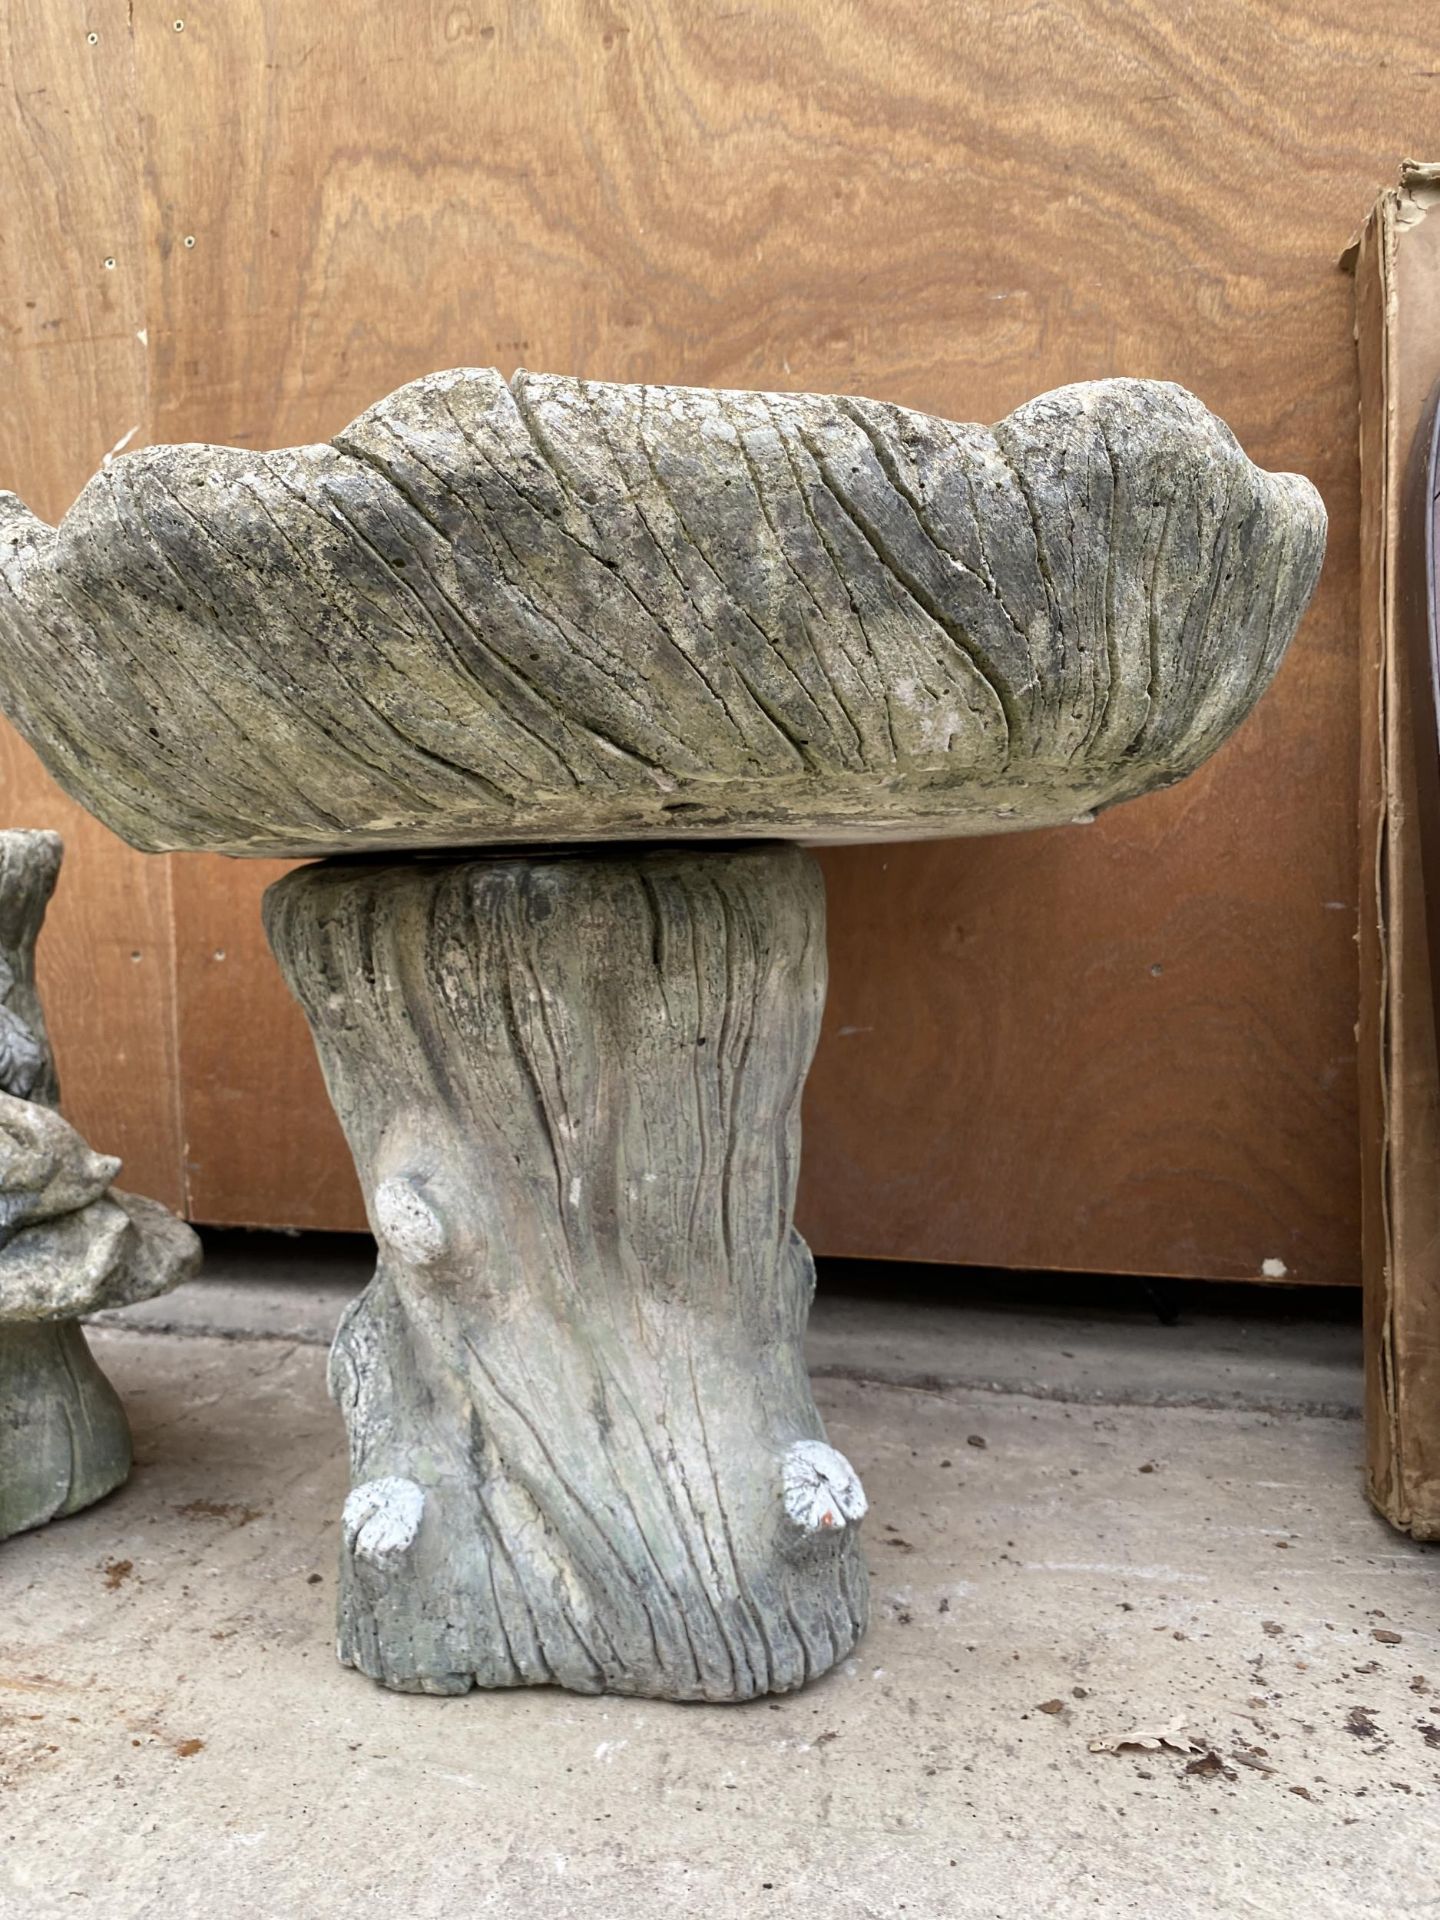 A LARGE RECONSTITUTED STONE BIRD BATH WITH PEDESTAL BASE - Image 2 of 4